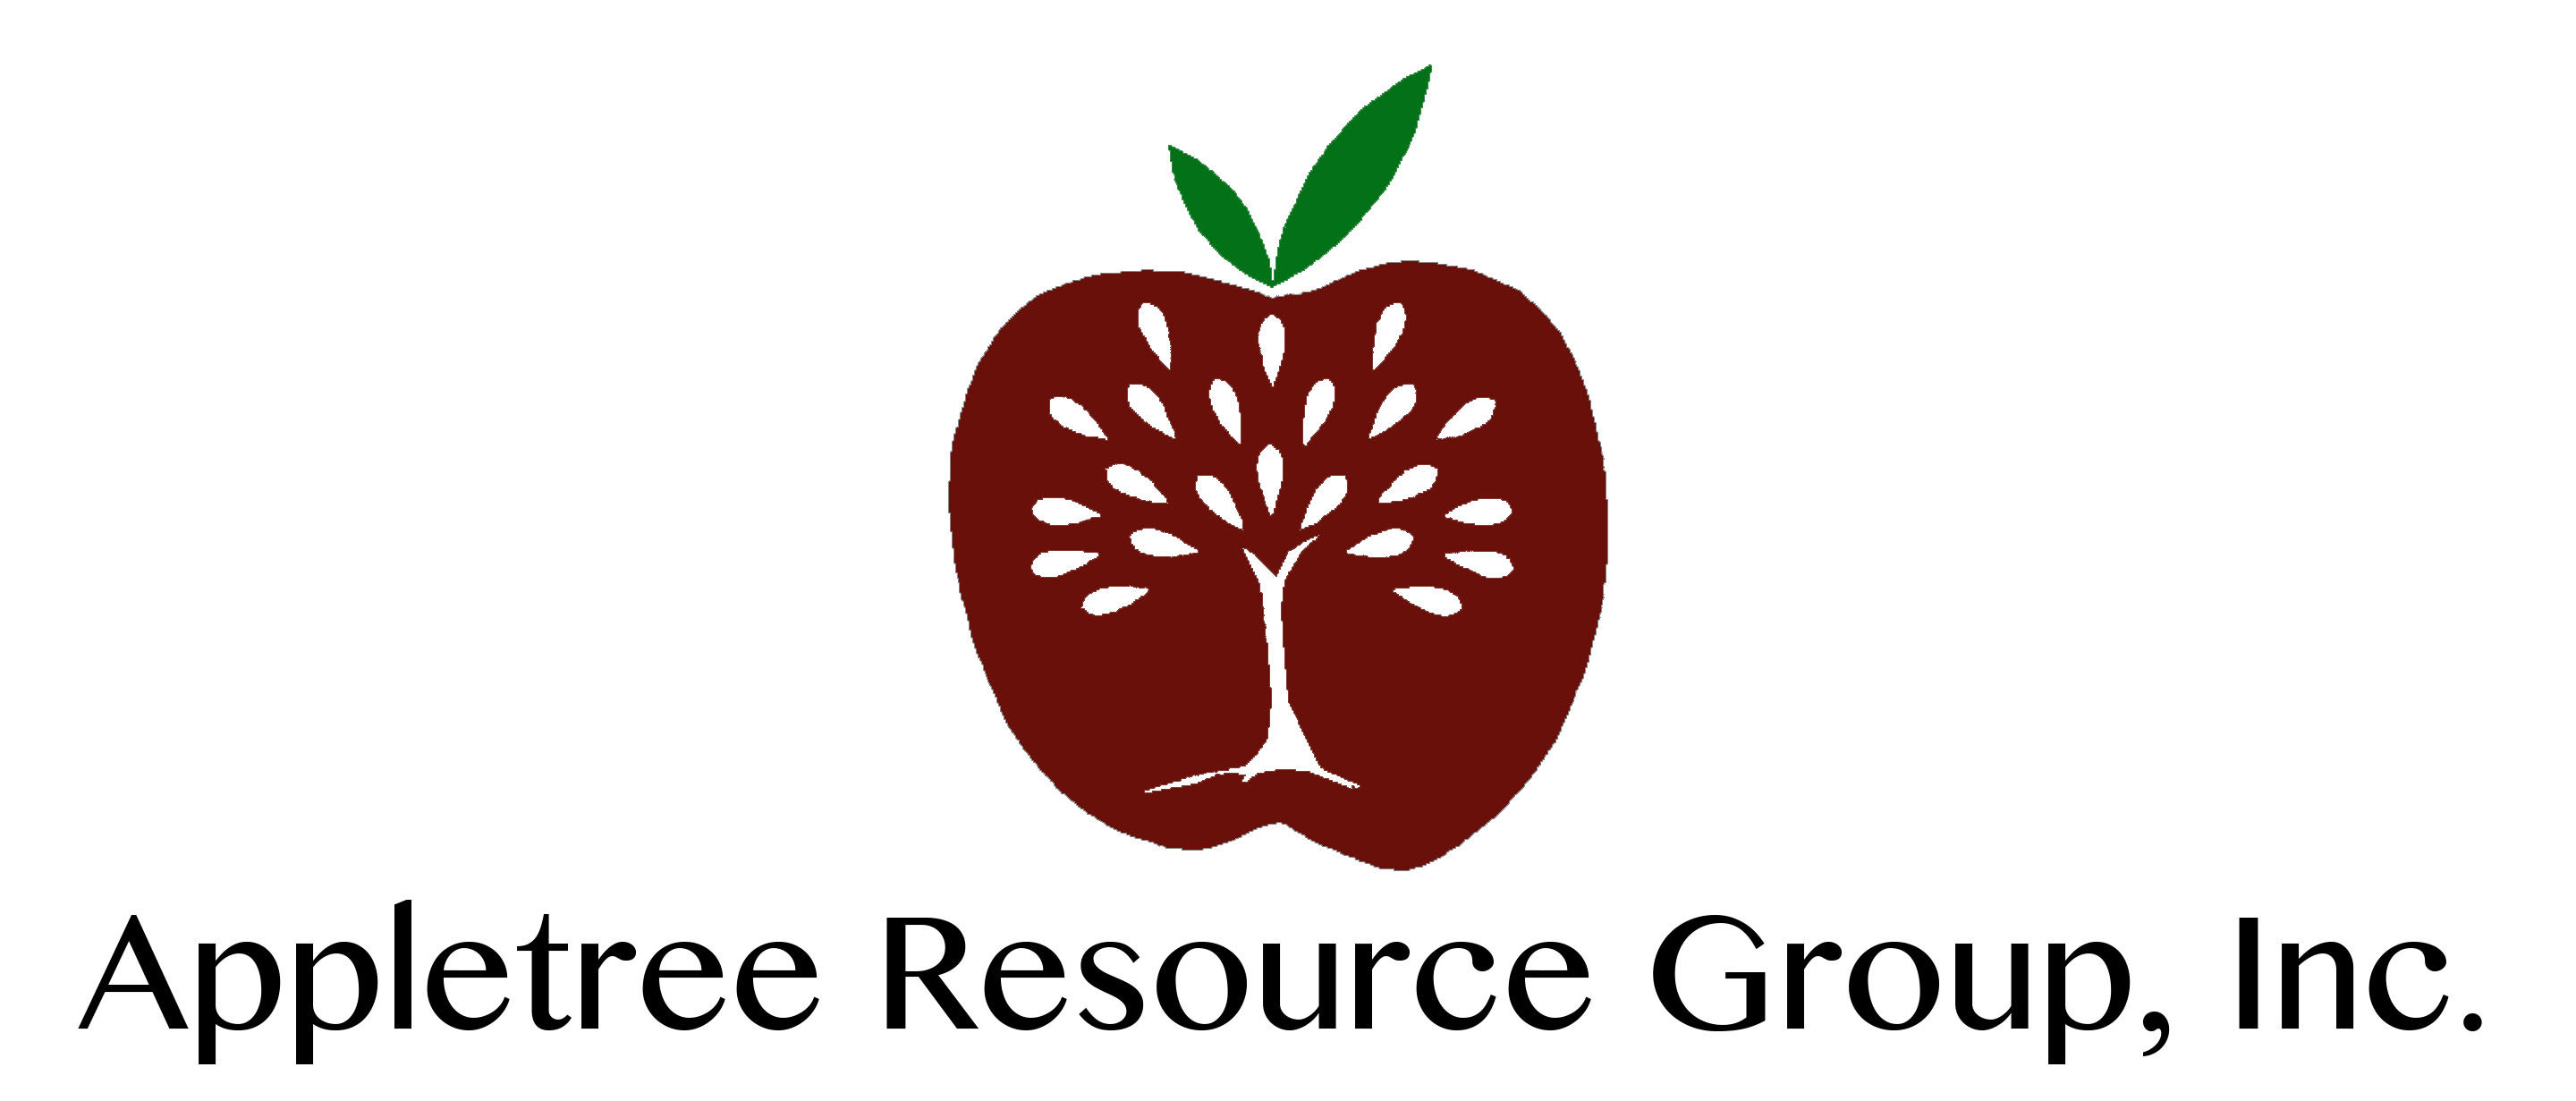 Appletree Resource Group